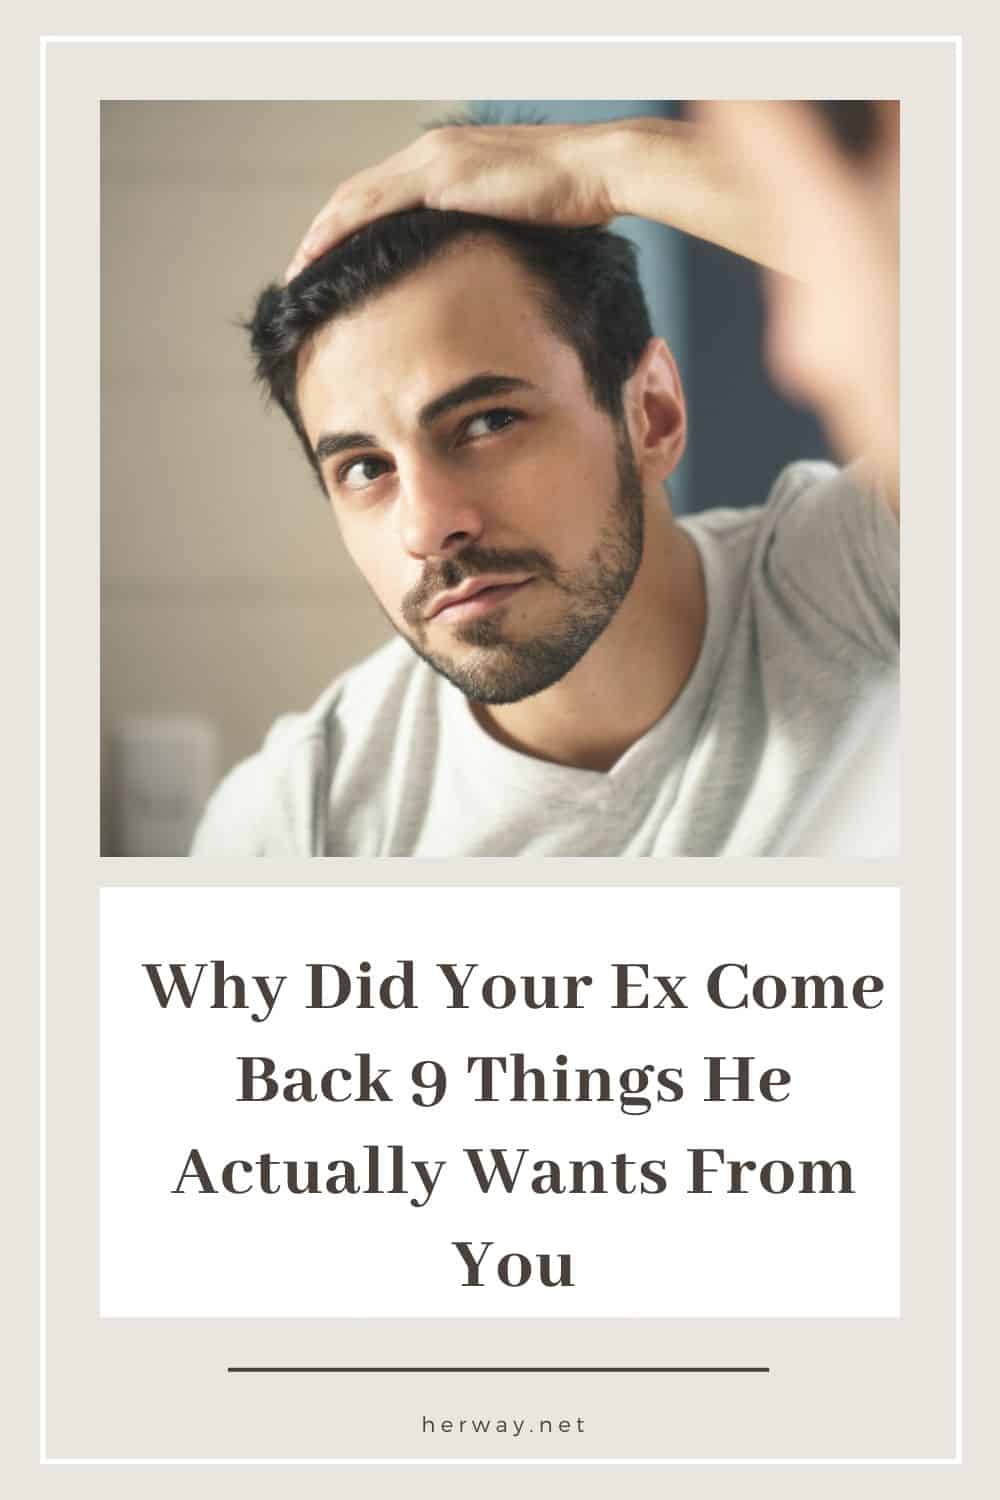 Why Did Your Ex Come Back 9 Things He Actually Wants From You